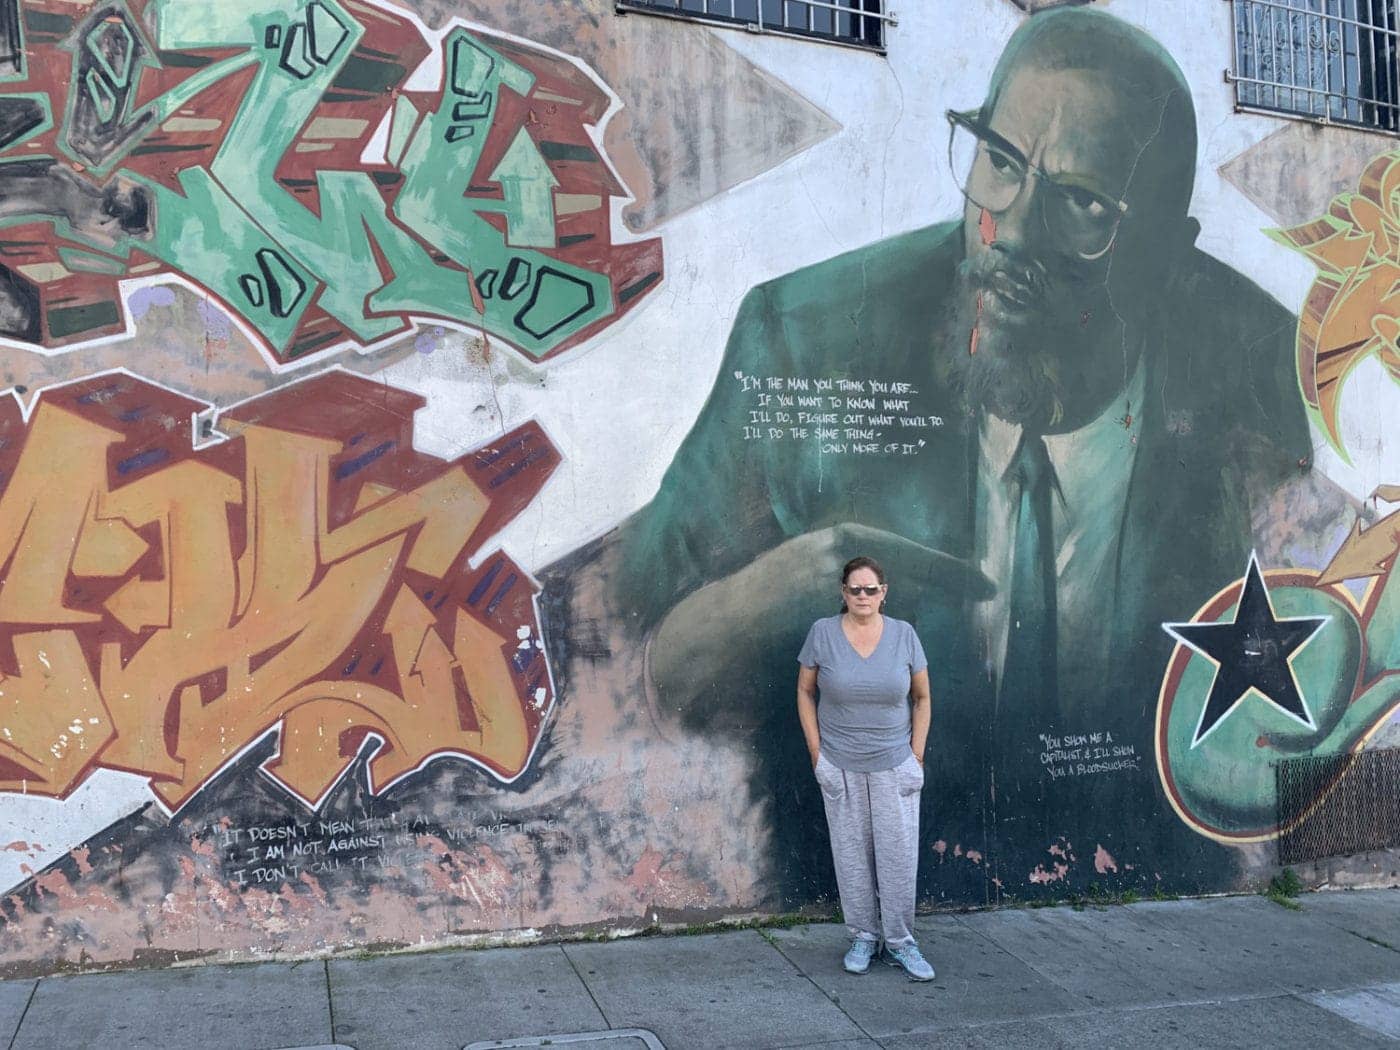 Kelly-at-the-Malcolm-X-mural-Bayview-SF-22022-1400x1050, T.H.U.G L.I.F.E: From gangster to growth, Behind Enemy Lines Featured 